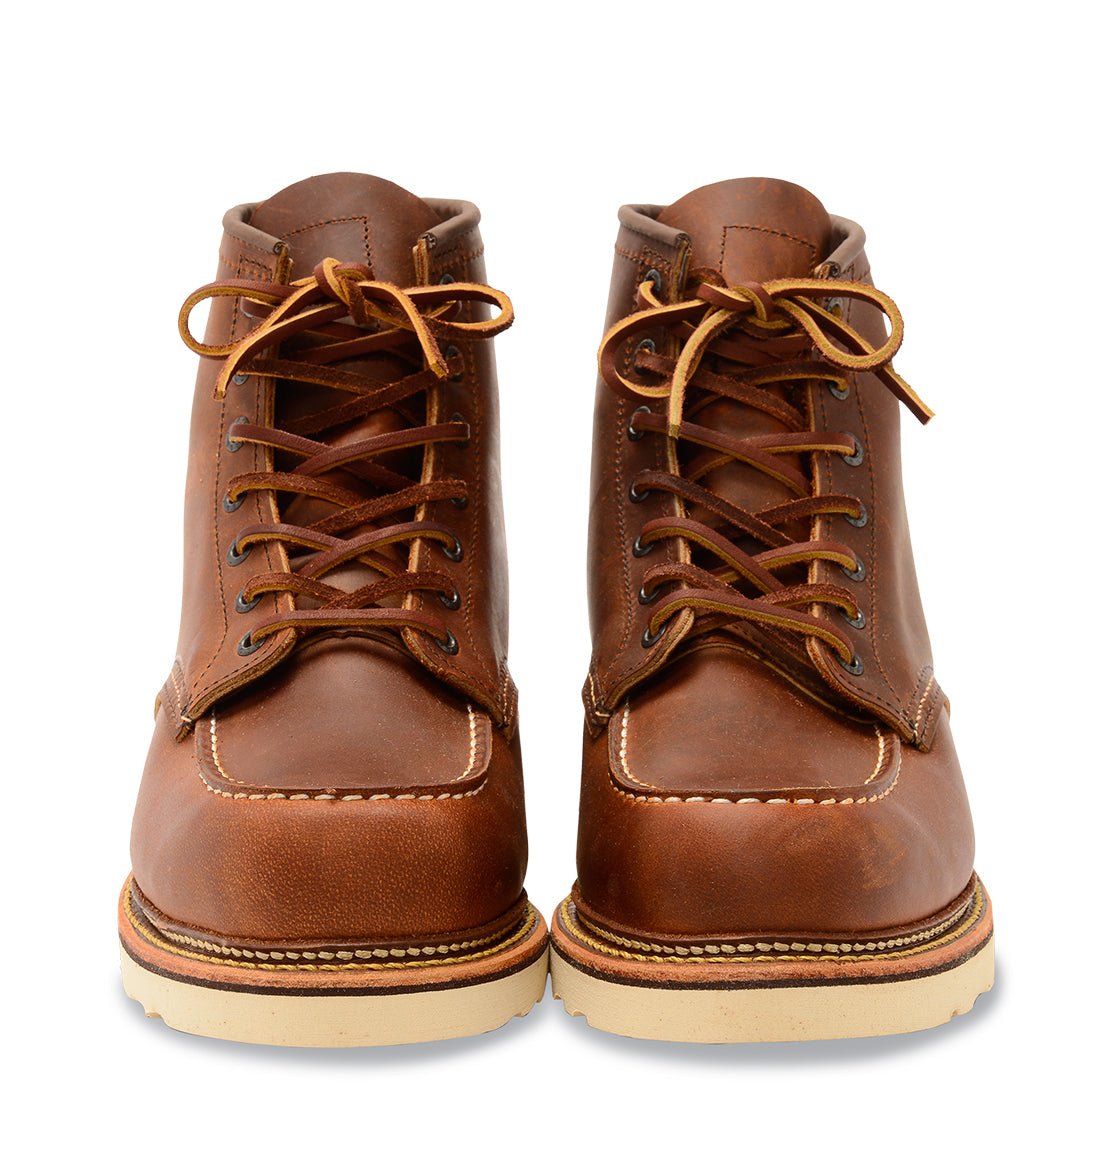 redwing boots leicester